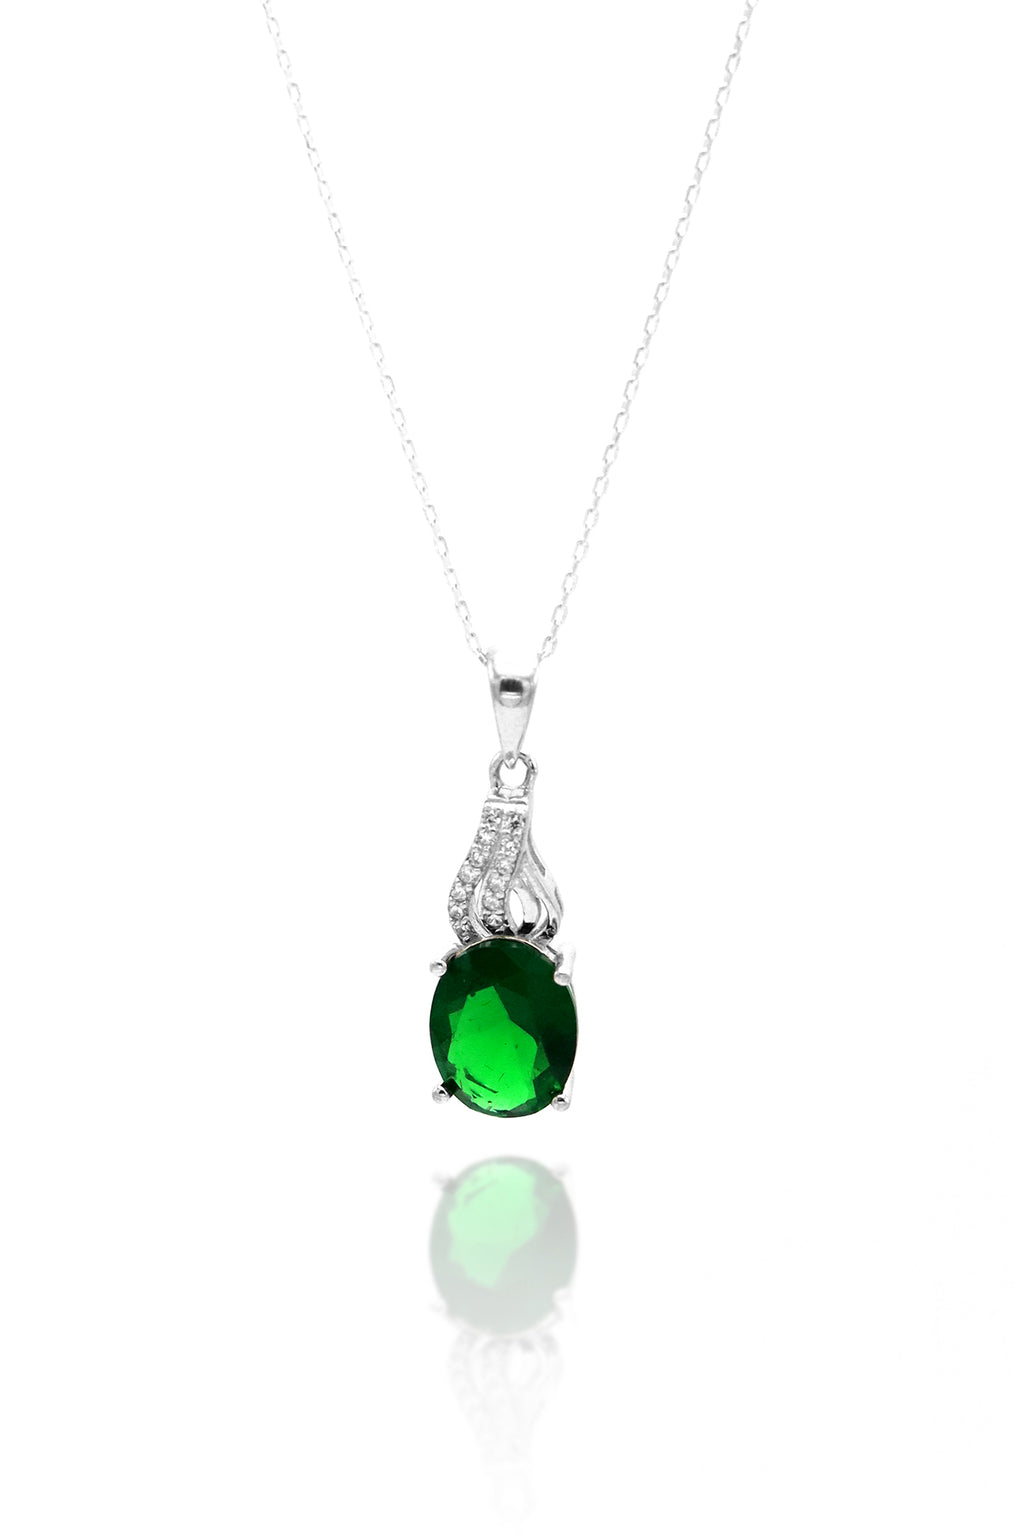 Authentic Handmade Silver Necklace With Emerald (NG201019517)